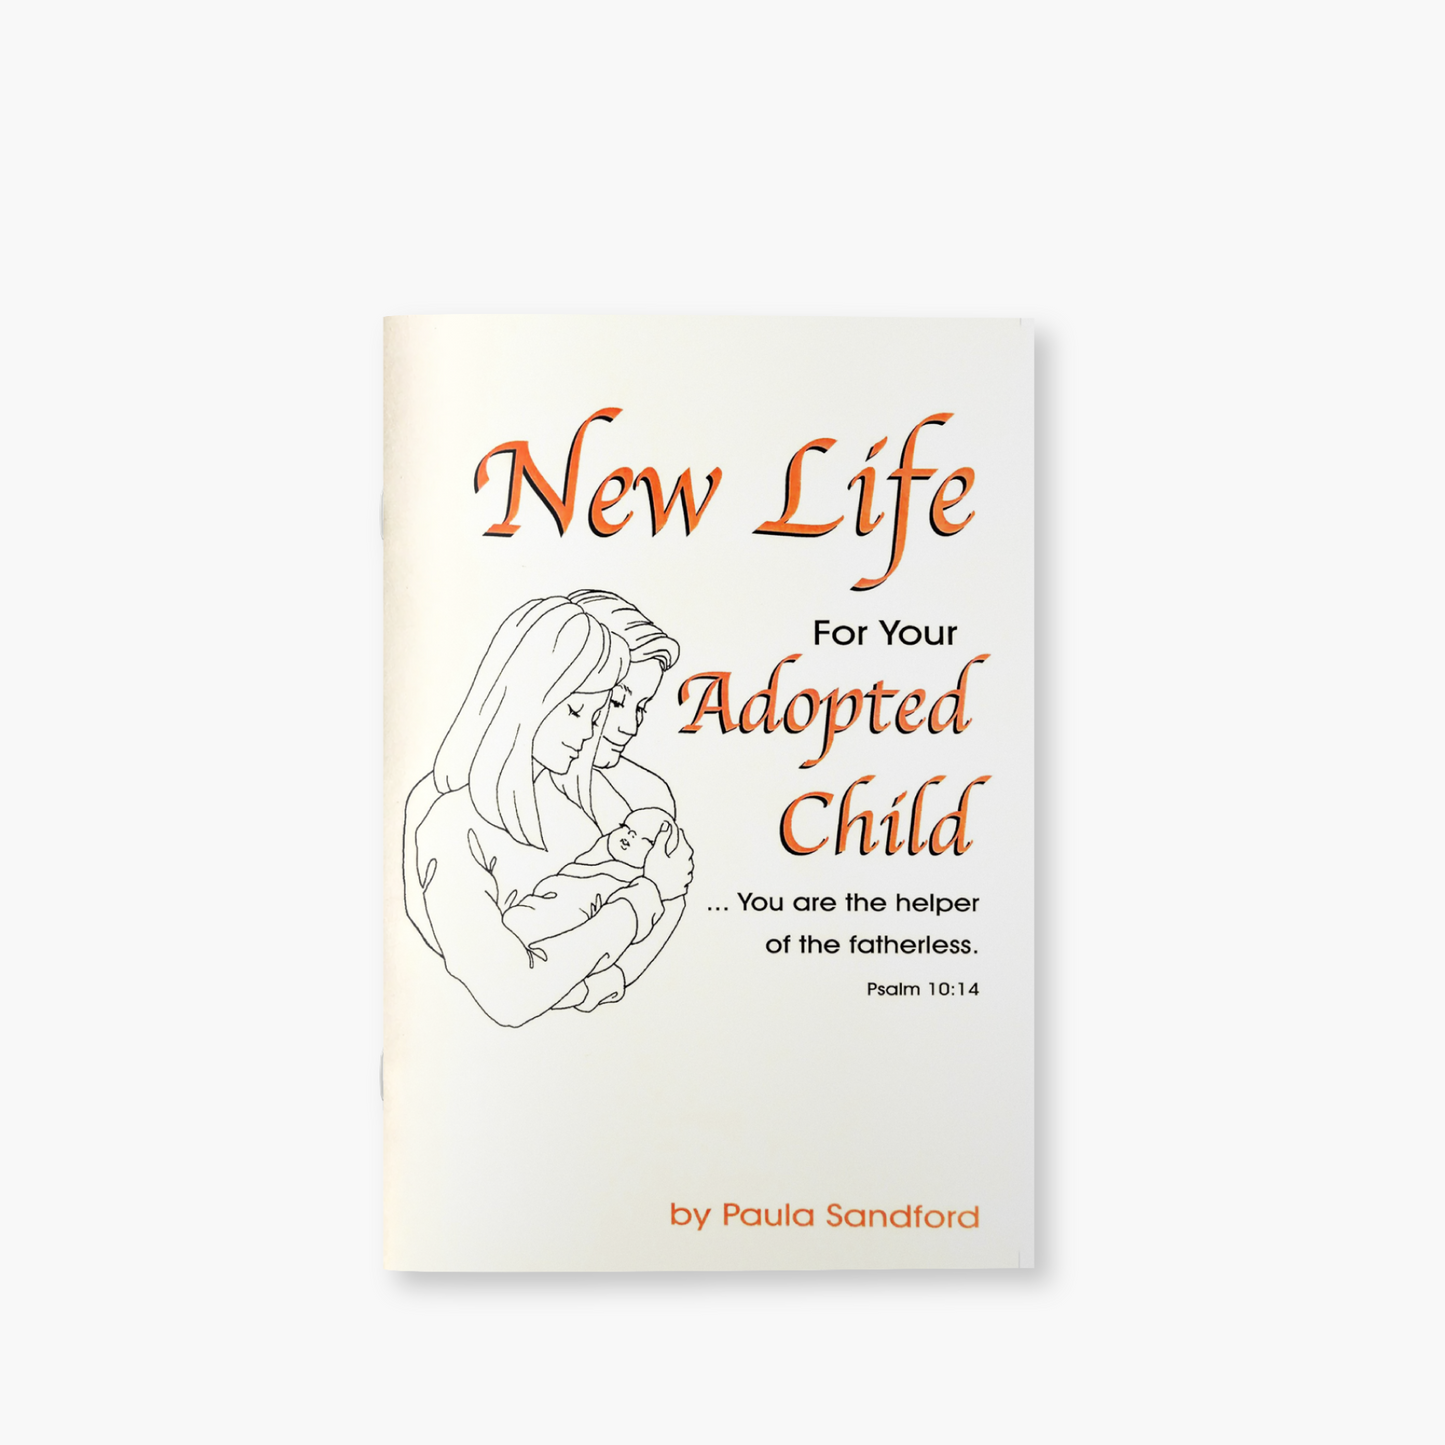 New Life for Your Adopted Child